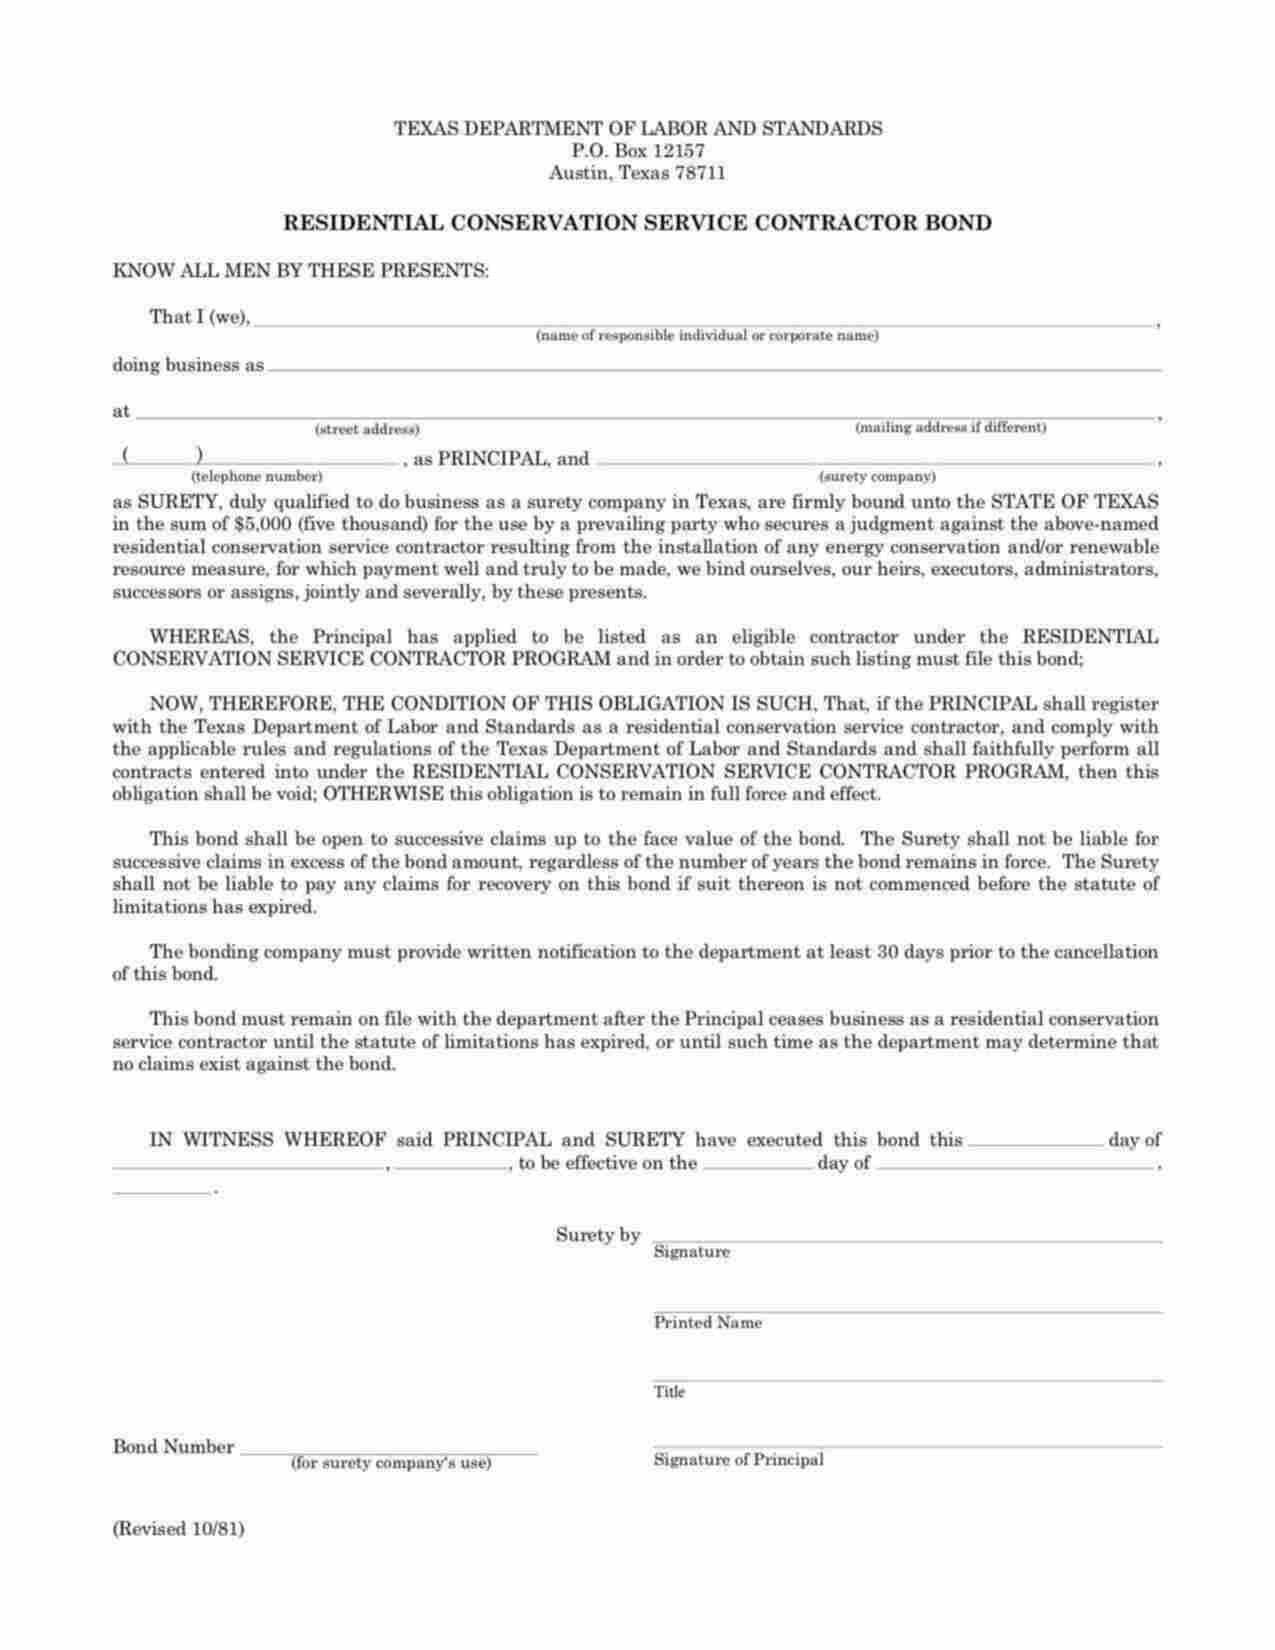 Texas Residential Conservation Service Contractor Bond Form